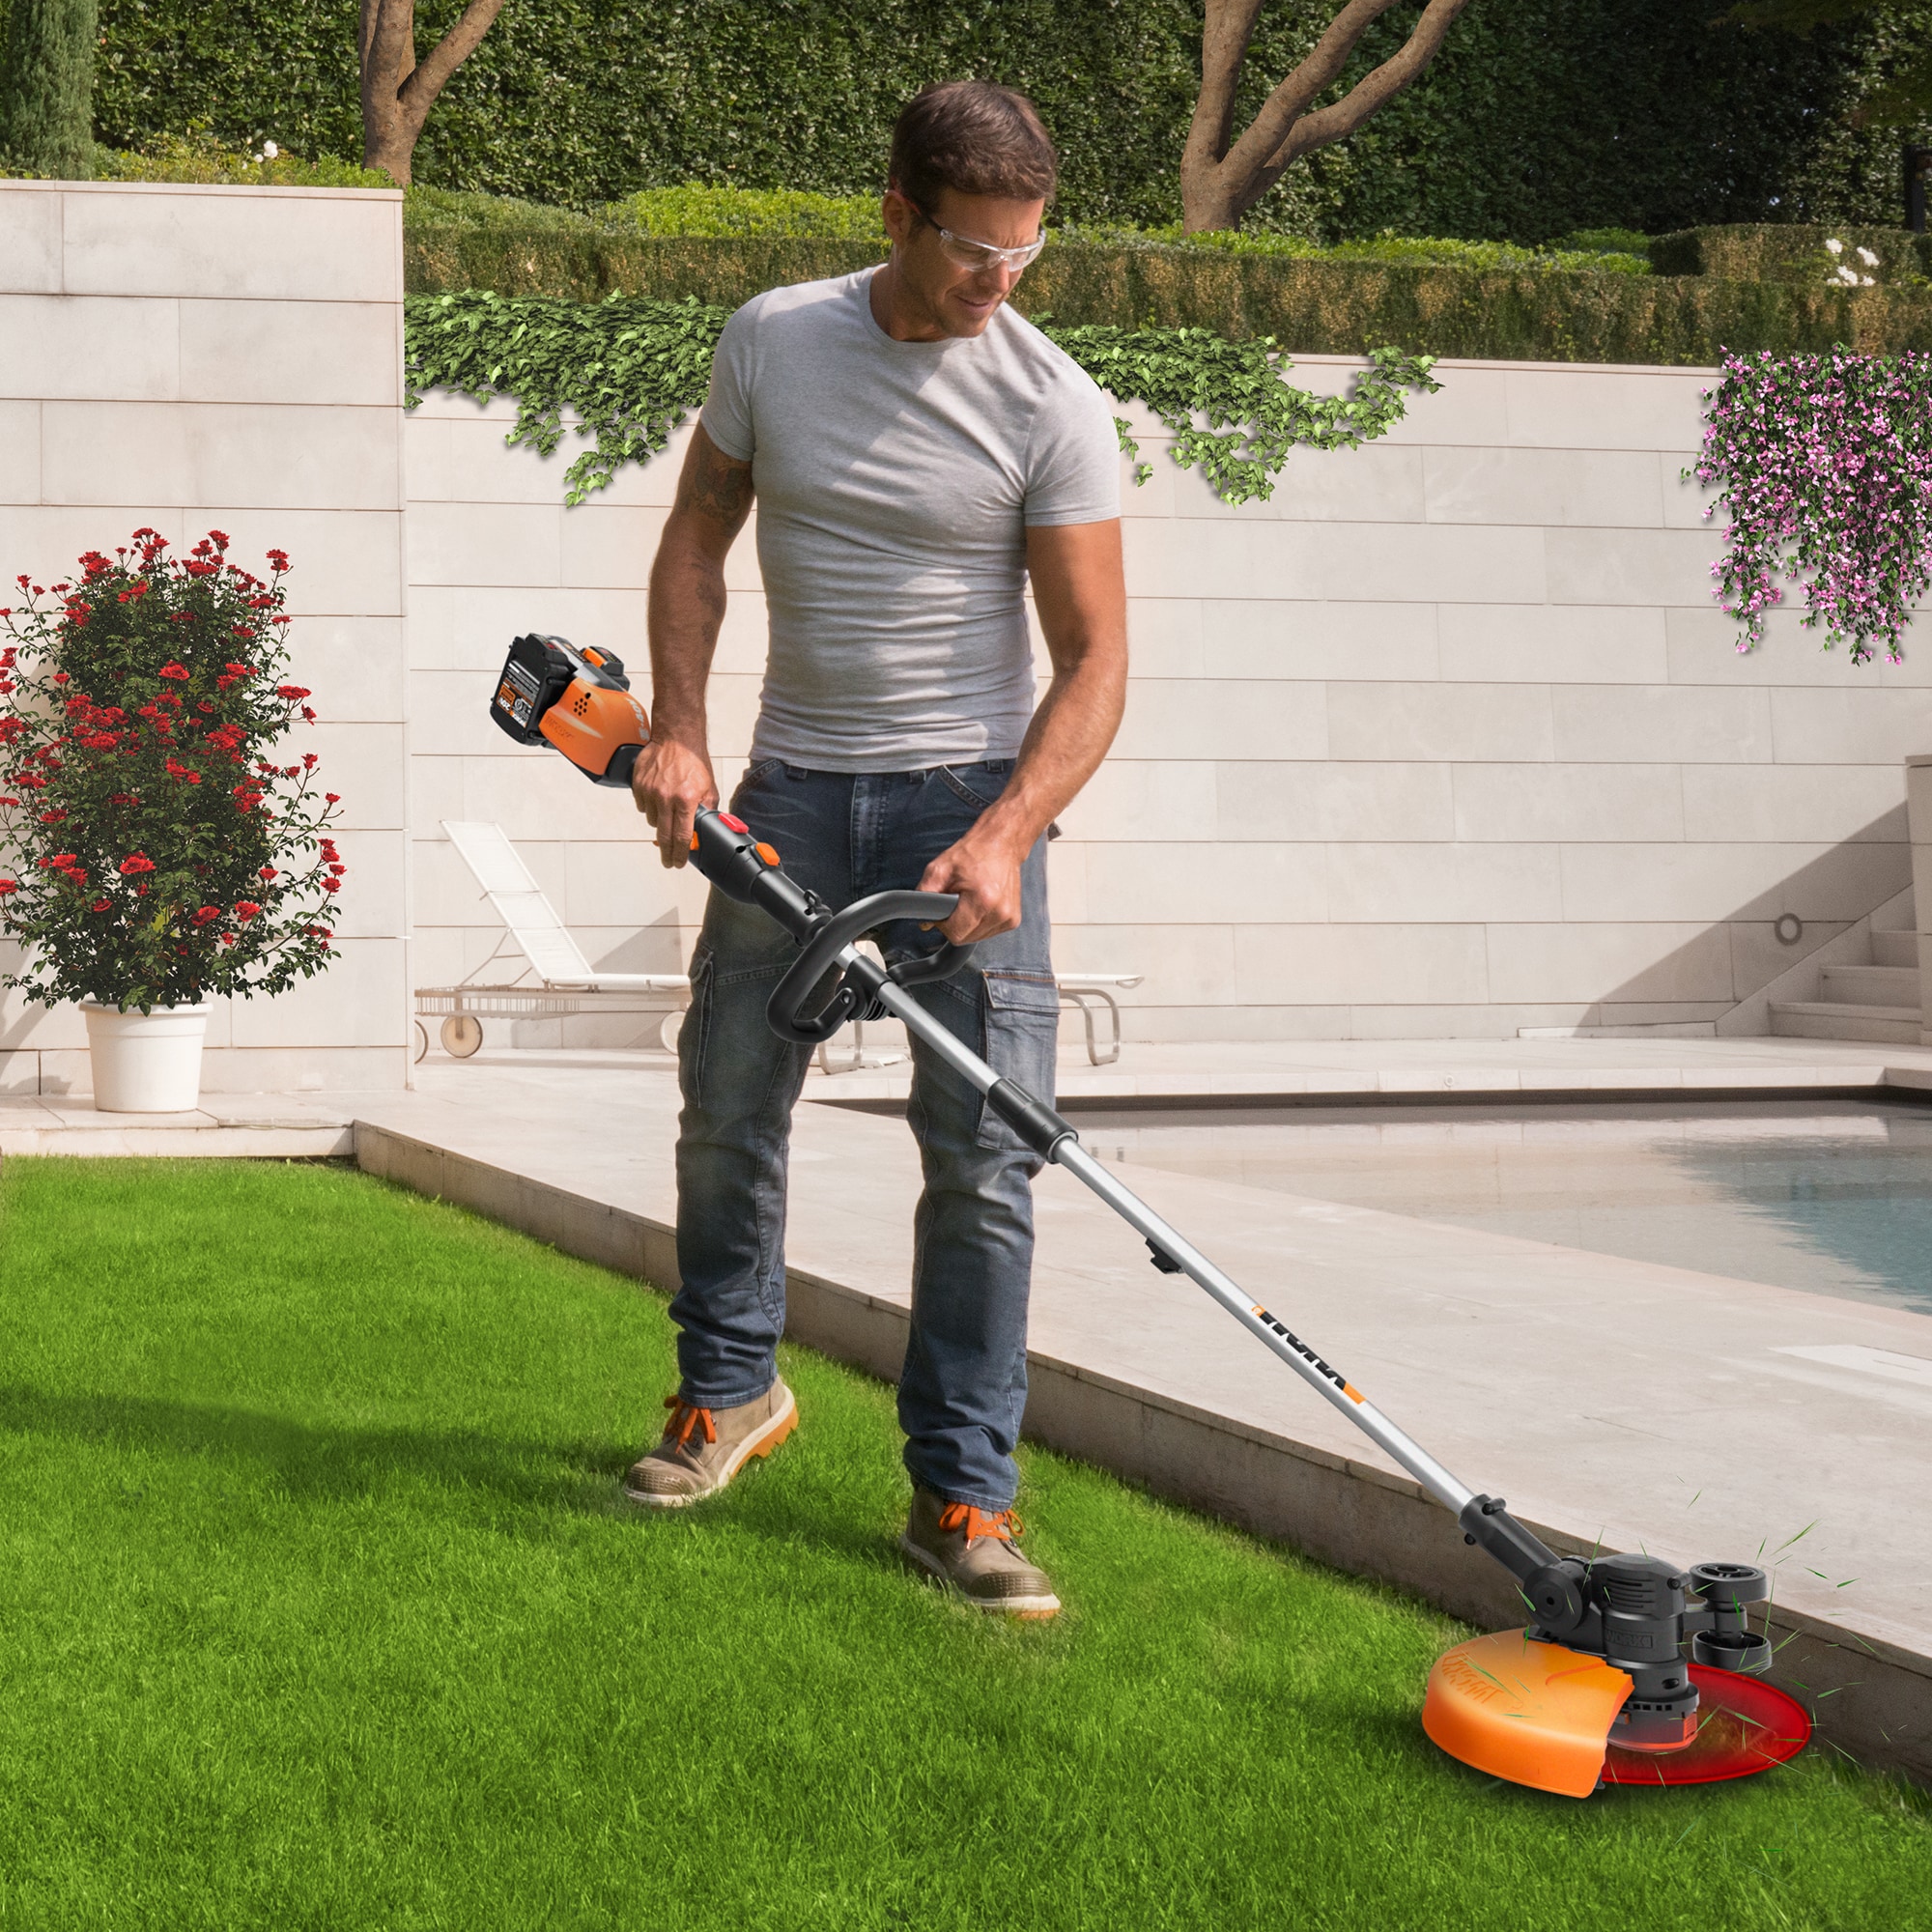 WEN 40413 40V Max Lithium-Ion Cordless 14-inch 2-in-1 String Trimmer and Edger with 2Ah Battery and Charger